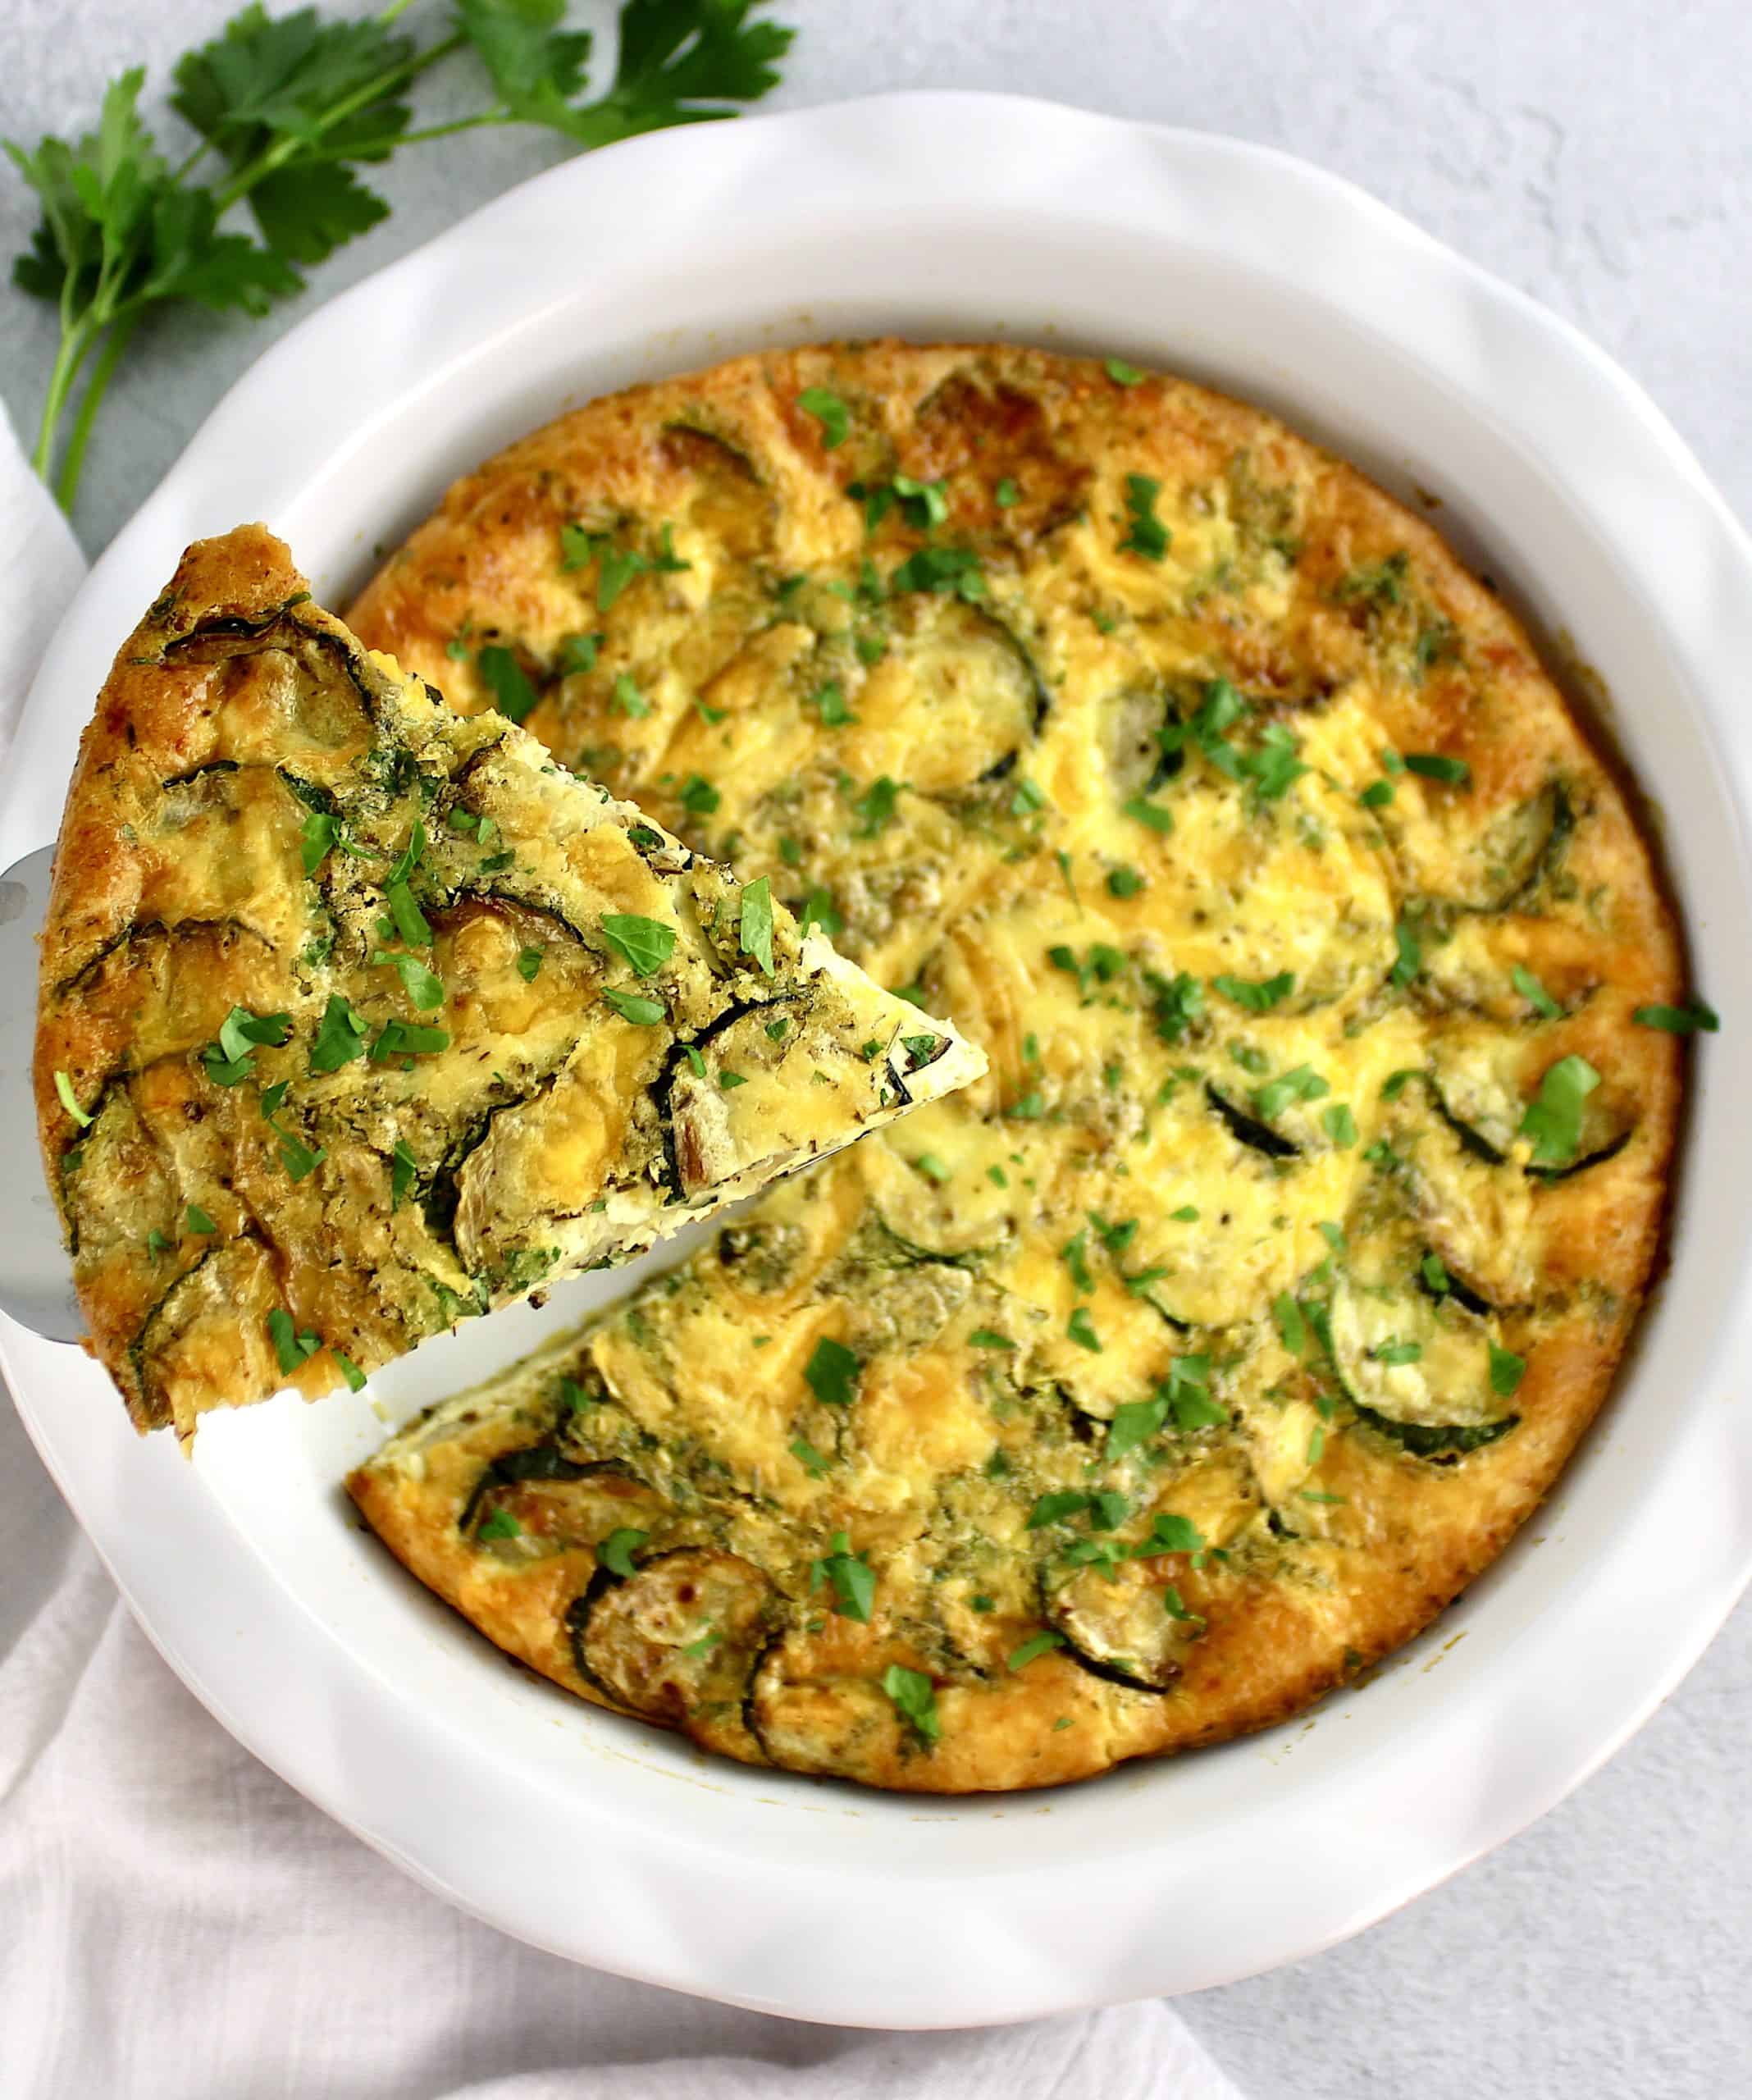 Crustless Zucchini Quiche with slice being held up